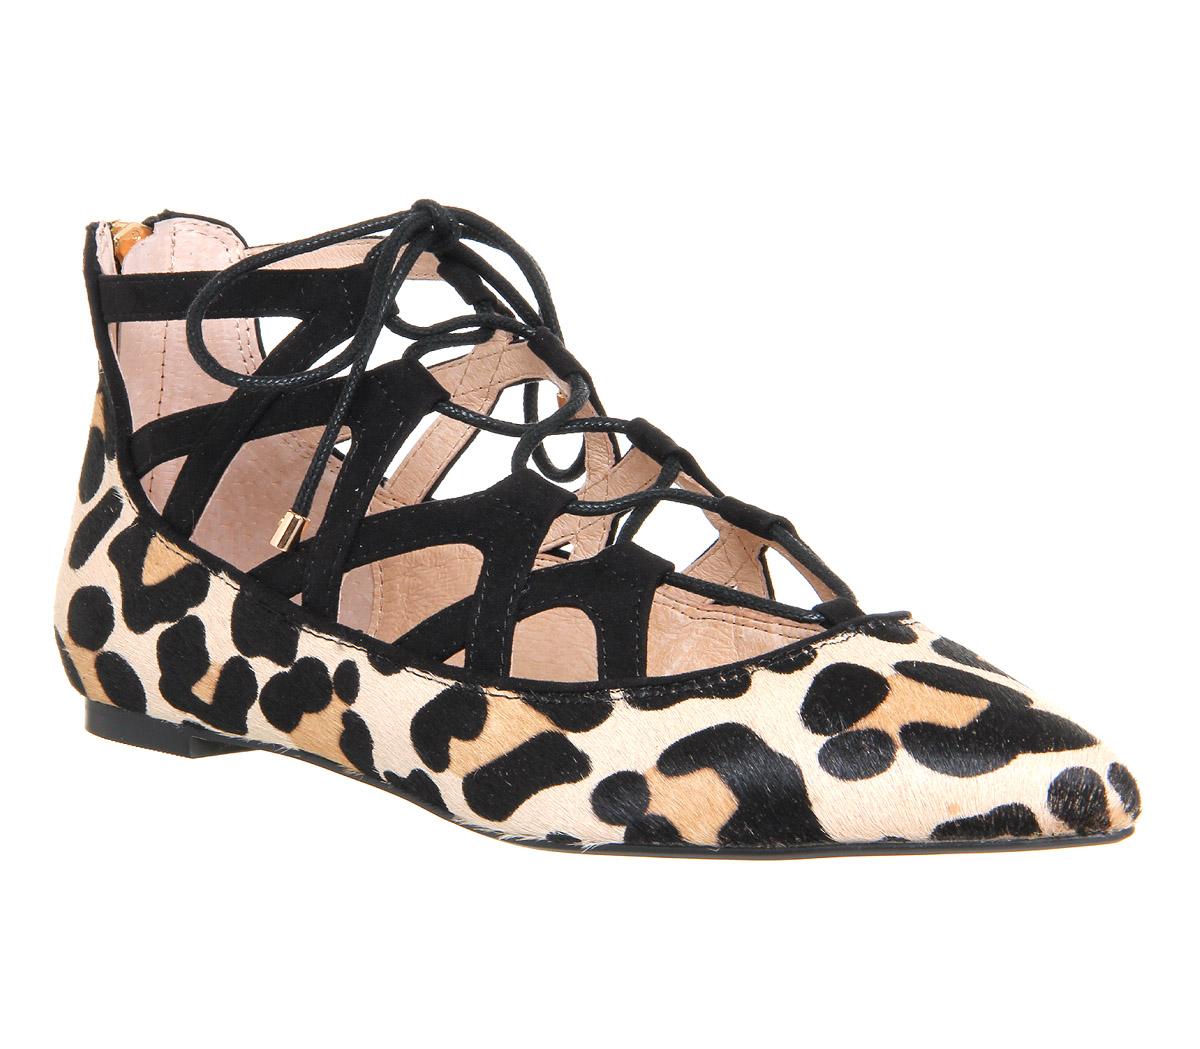 OFFICE Vibrant Lace Up Flats Leopard Cow Hair Effect - Flat Shoes for Women